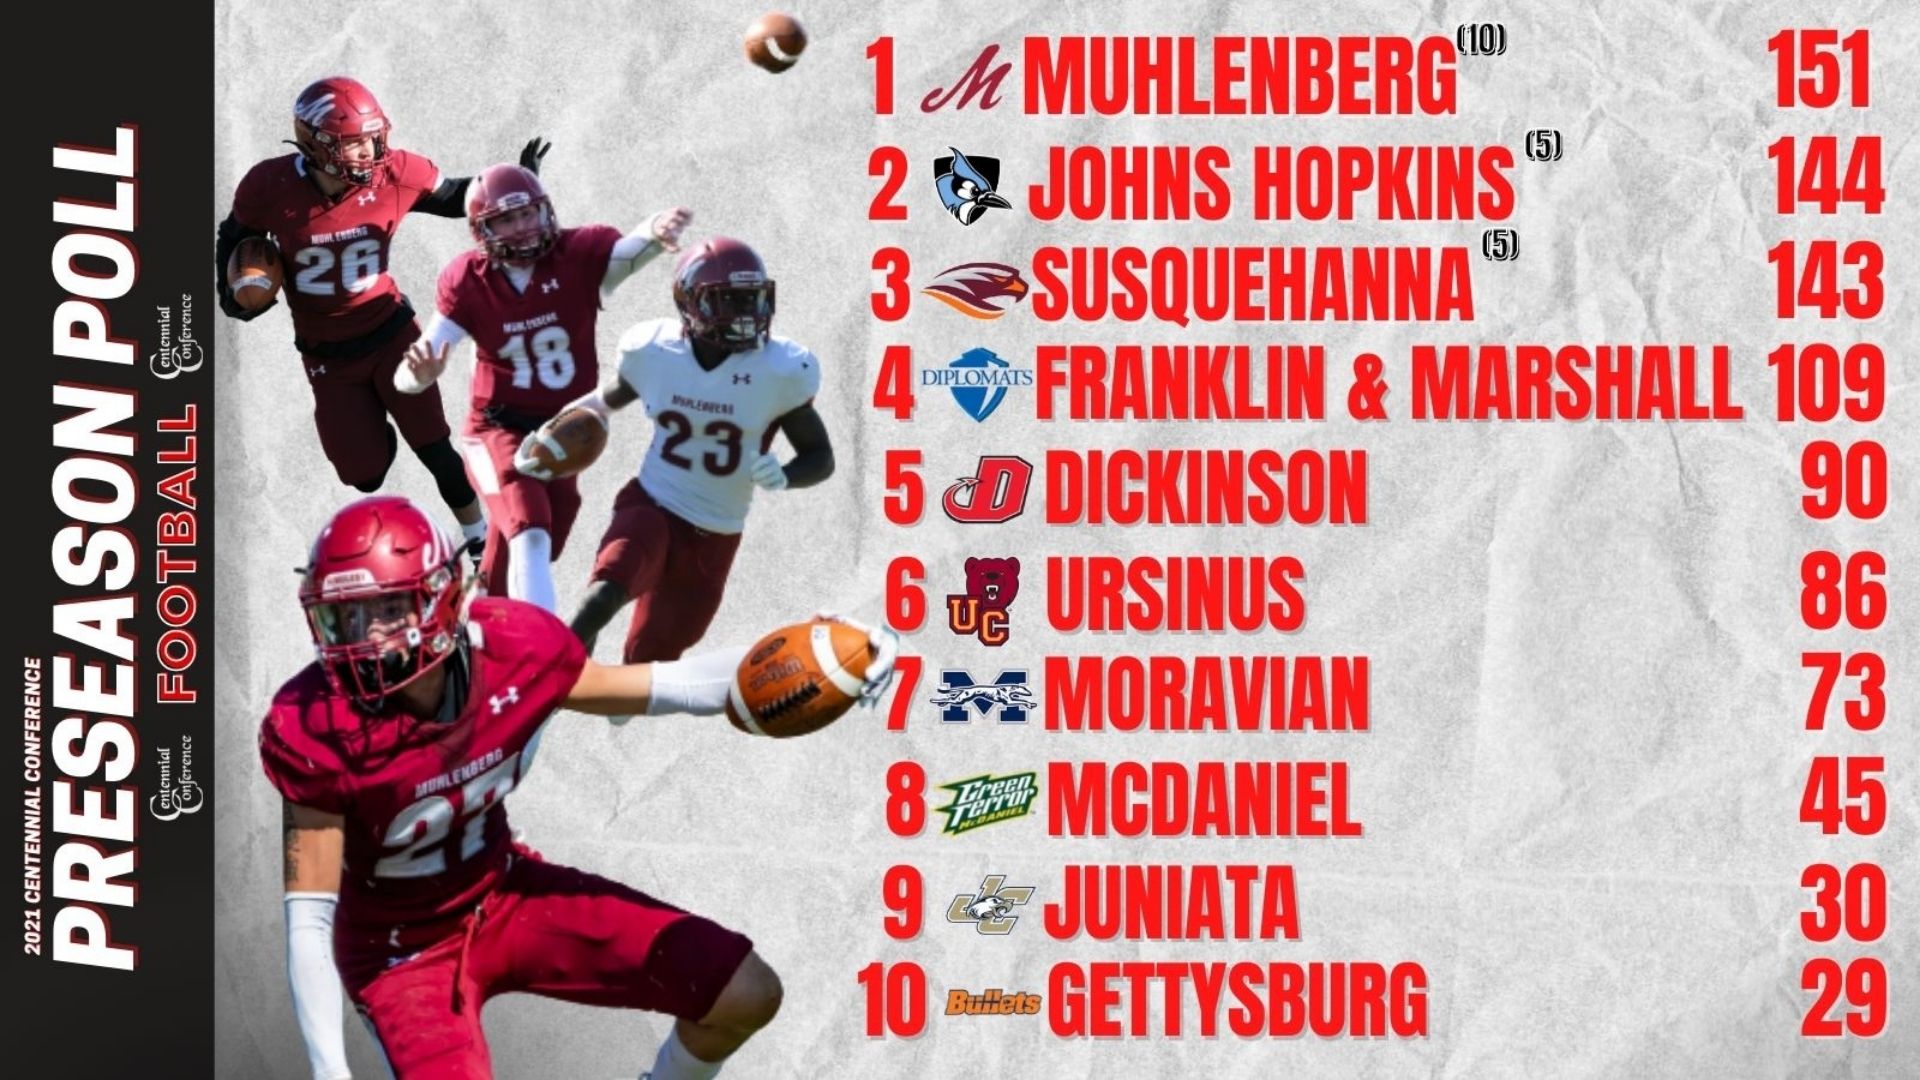 Muhlenberg Leads CC Football Preseason Poll; Hopkins, Susquehanna Also Receive First-Place Votes